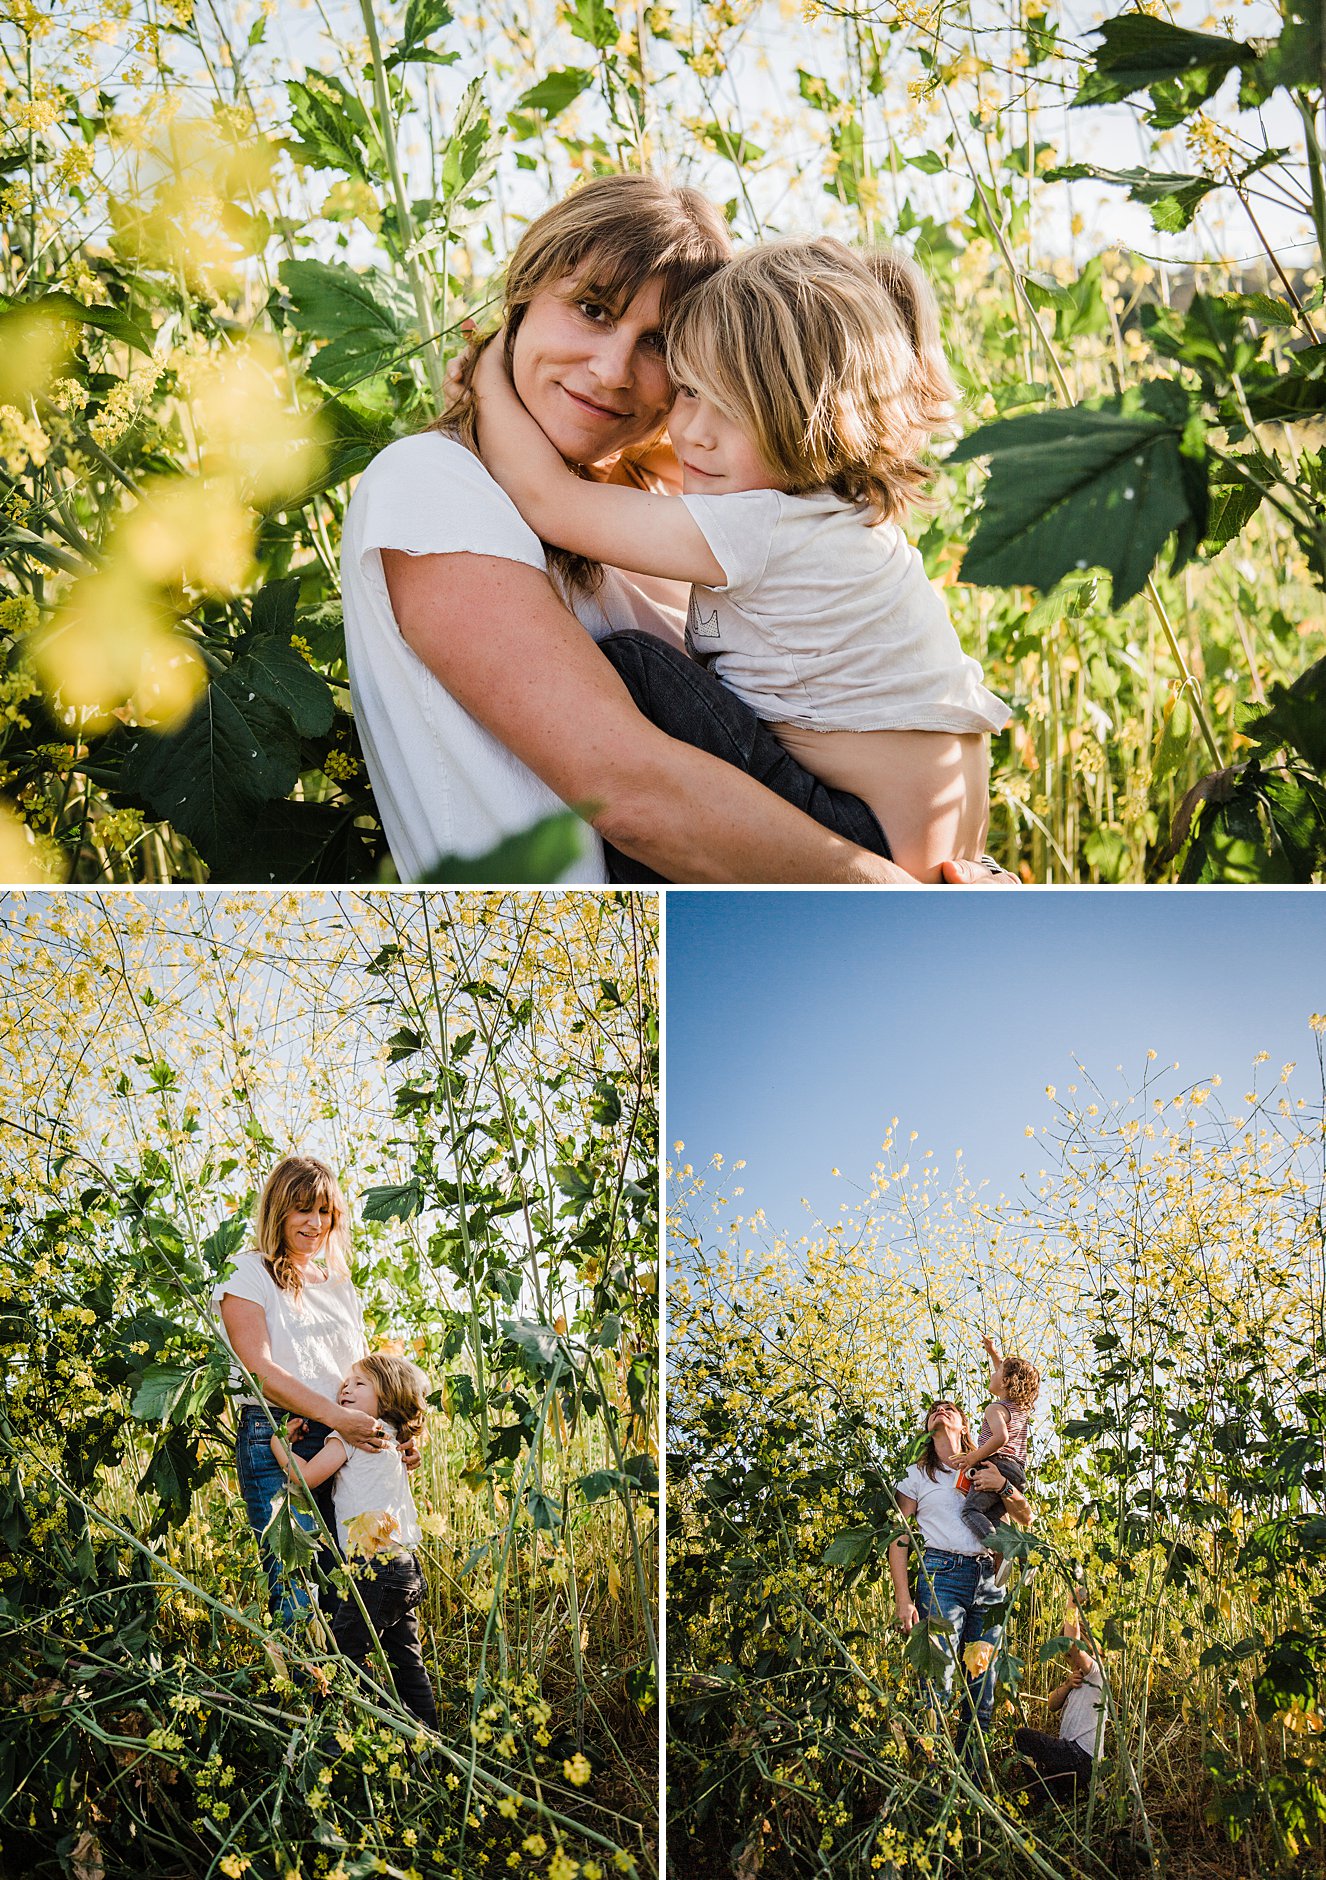 Mommie and me photos in the yellow flower field tall grass